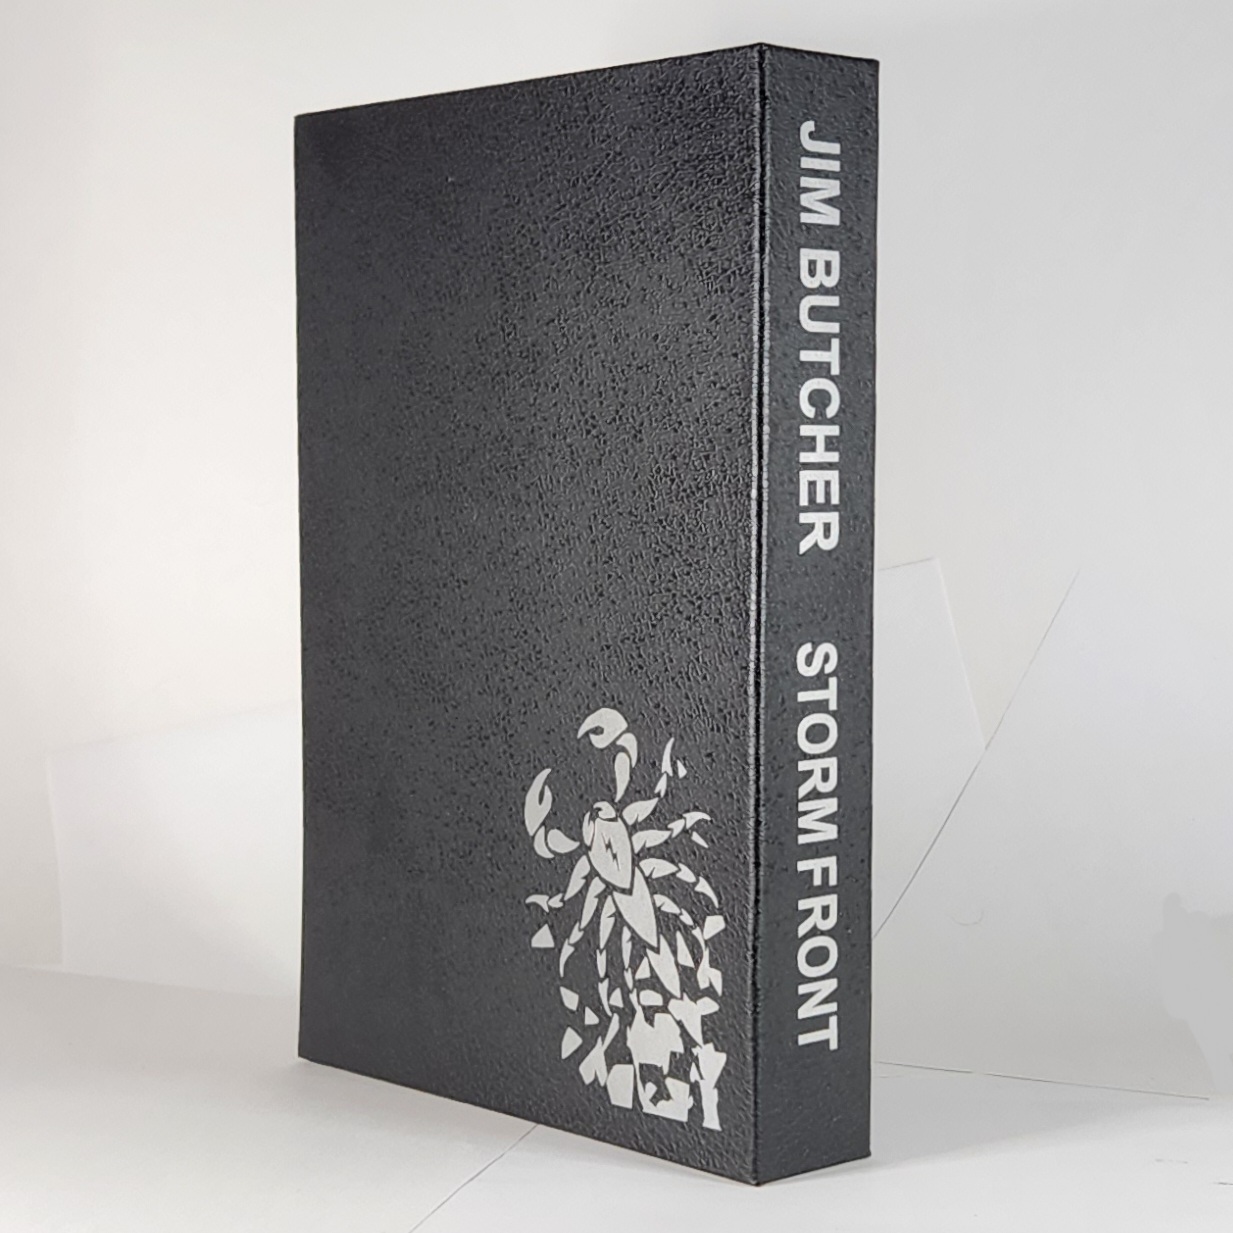 Custom Book Slipcase Design for the Storm Front by Jim Butcher with silver icon and author and title text.